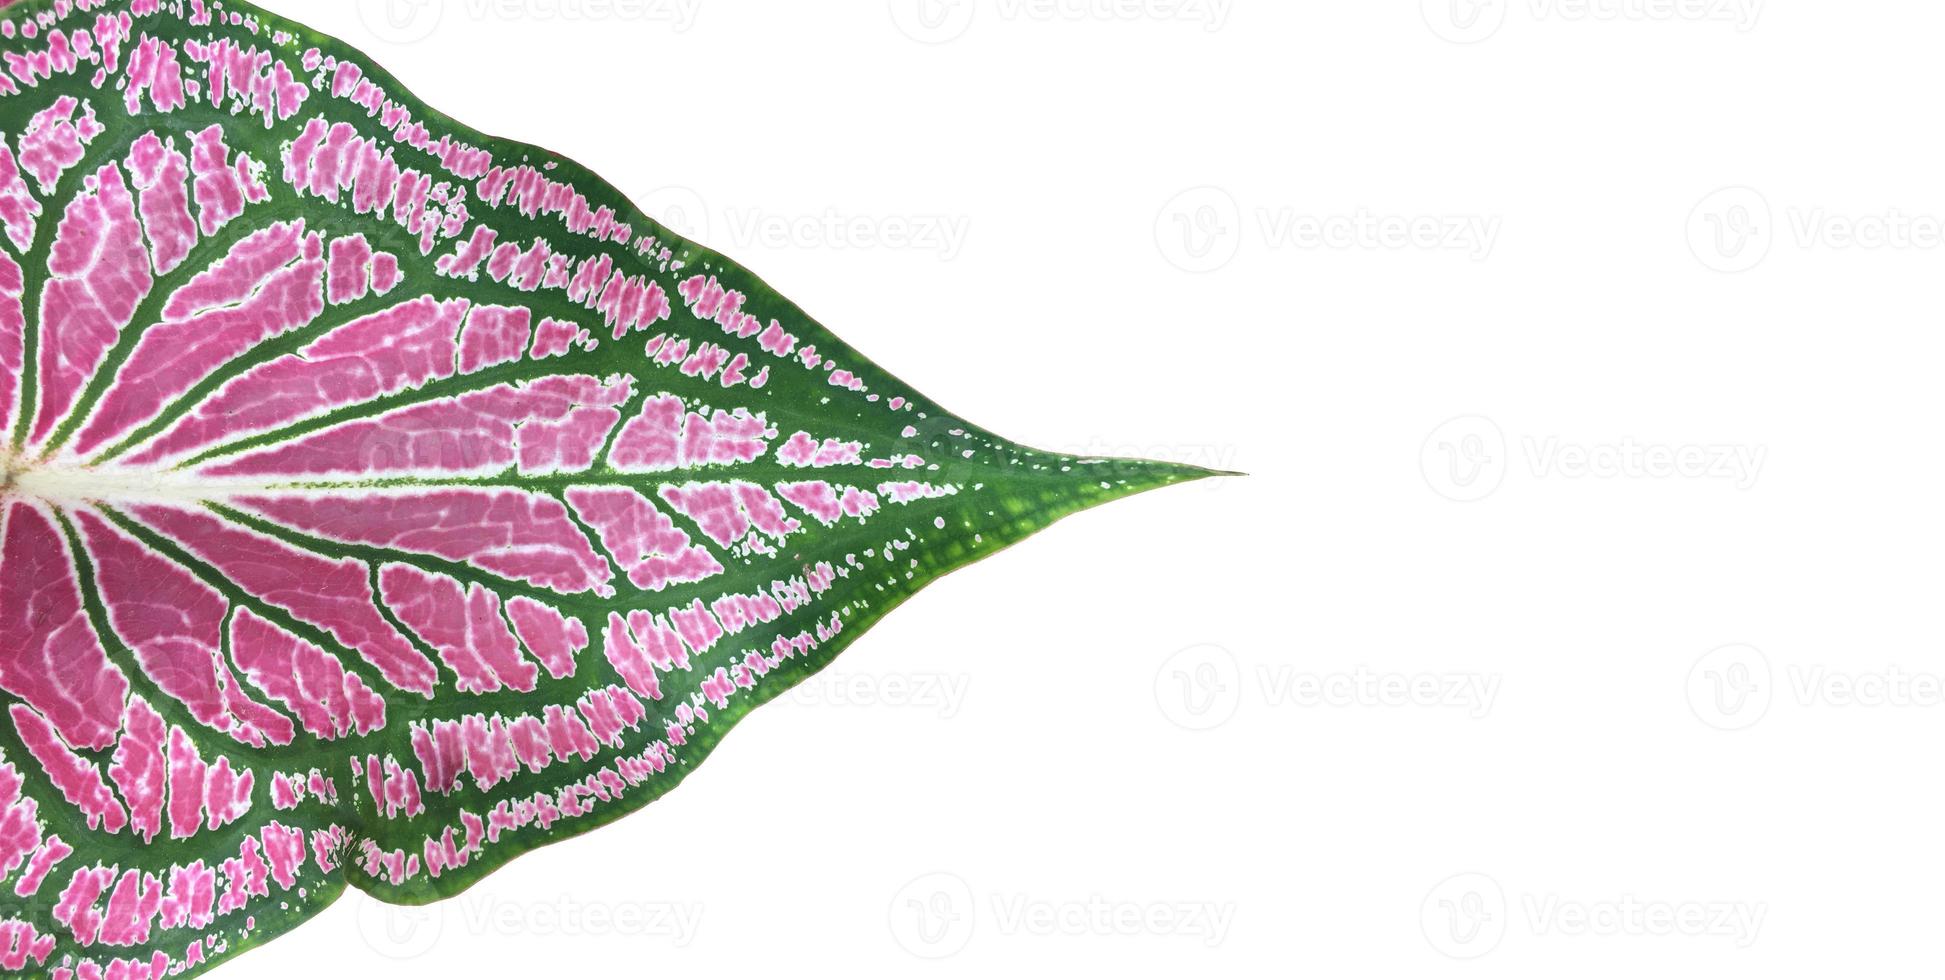 Isolated caladium leaf on white background with clipping paths. photo